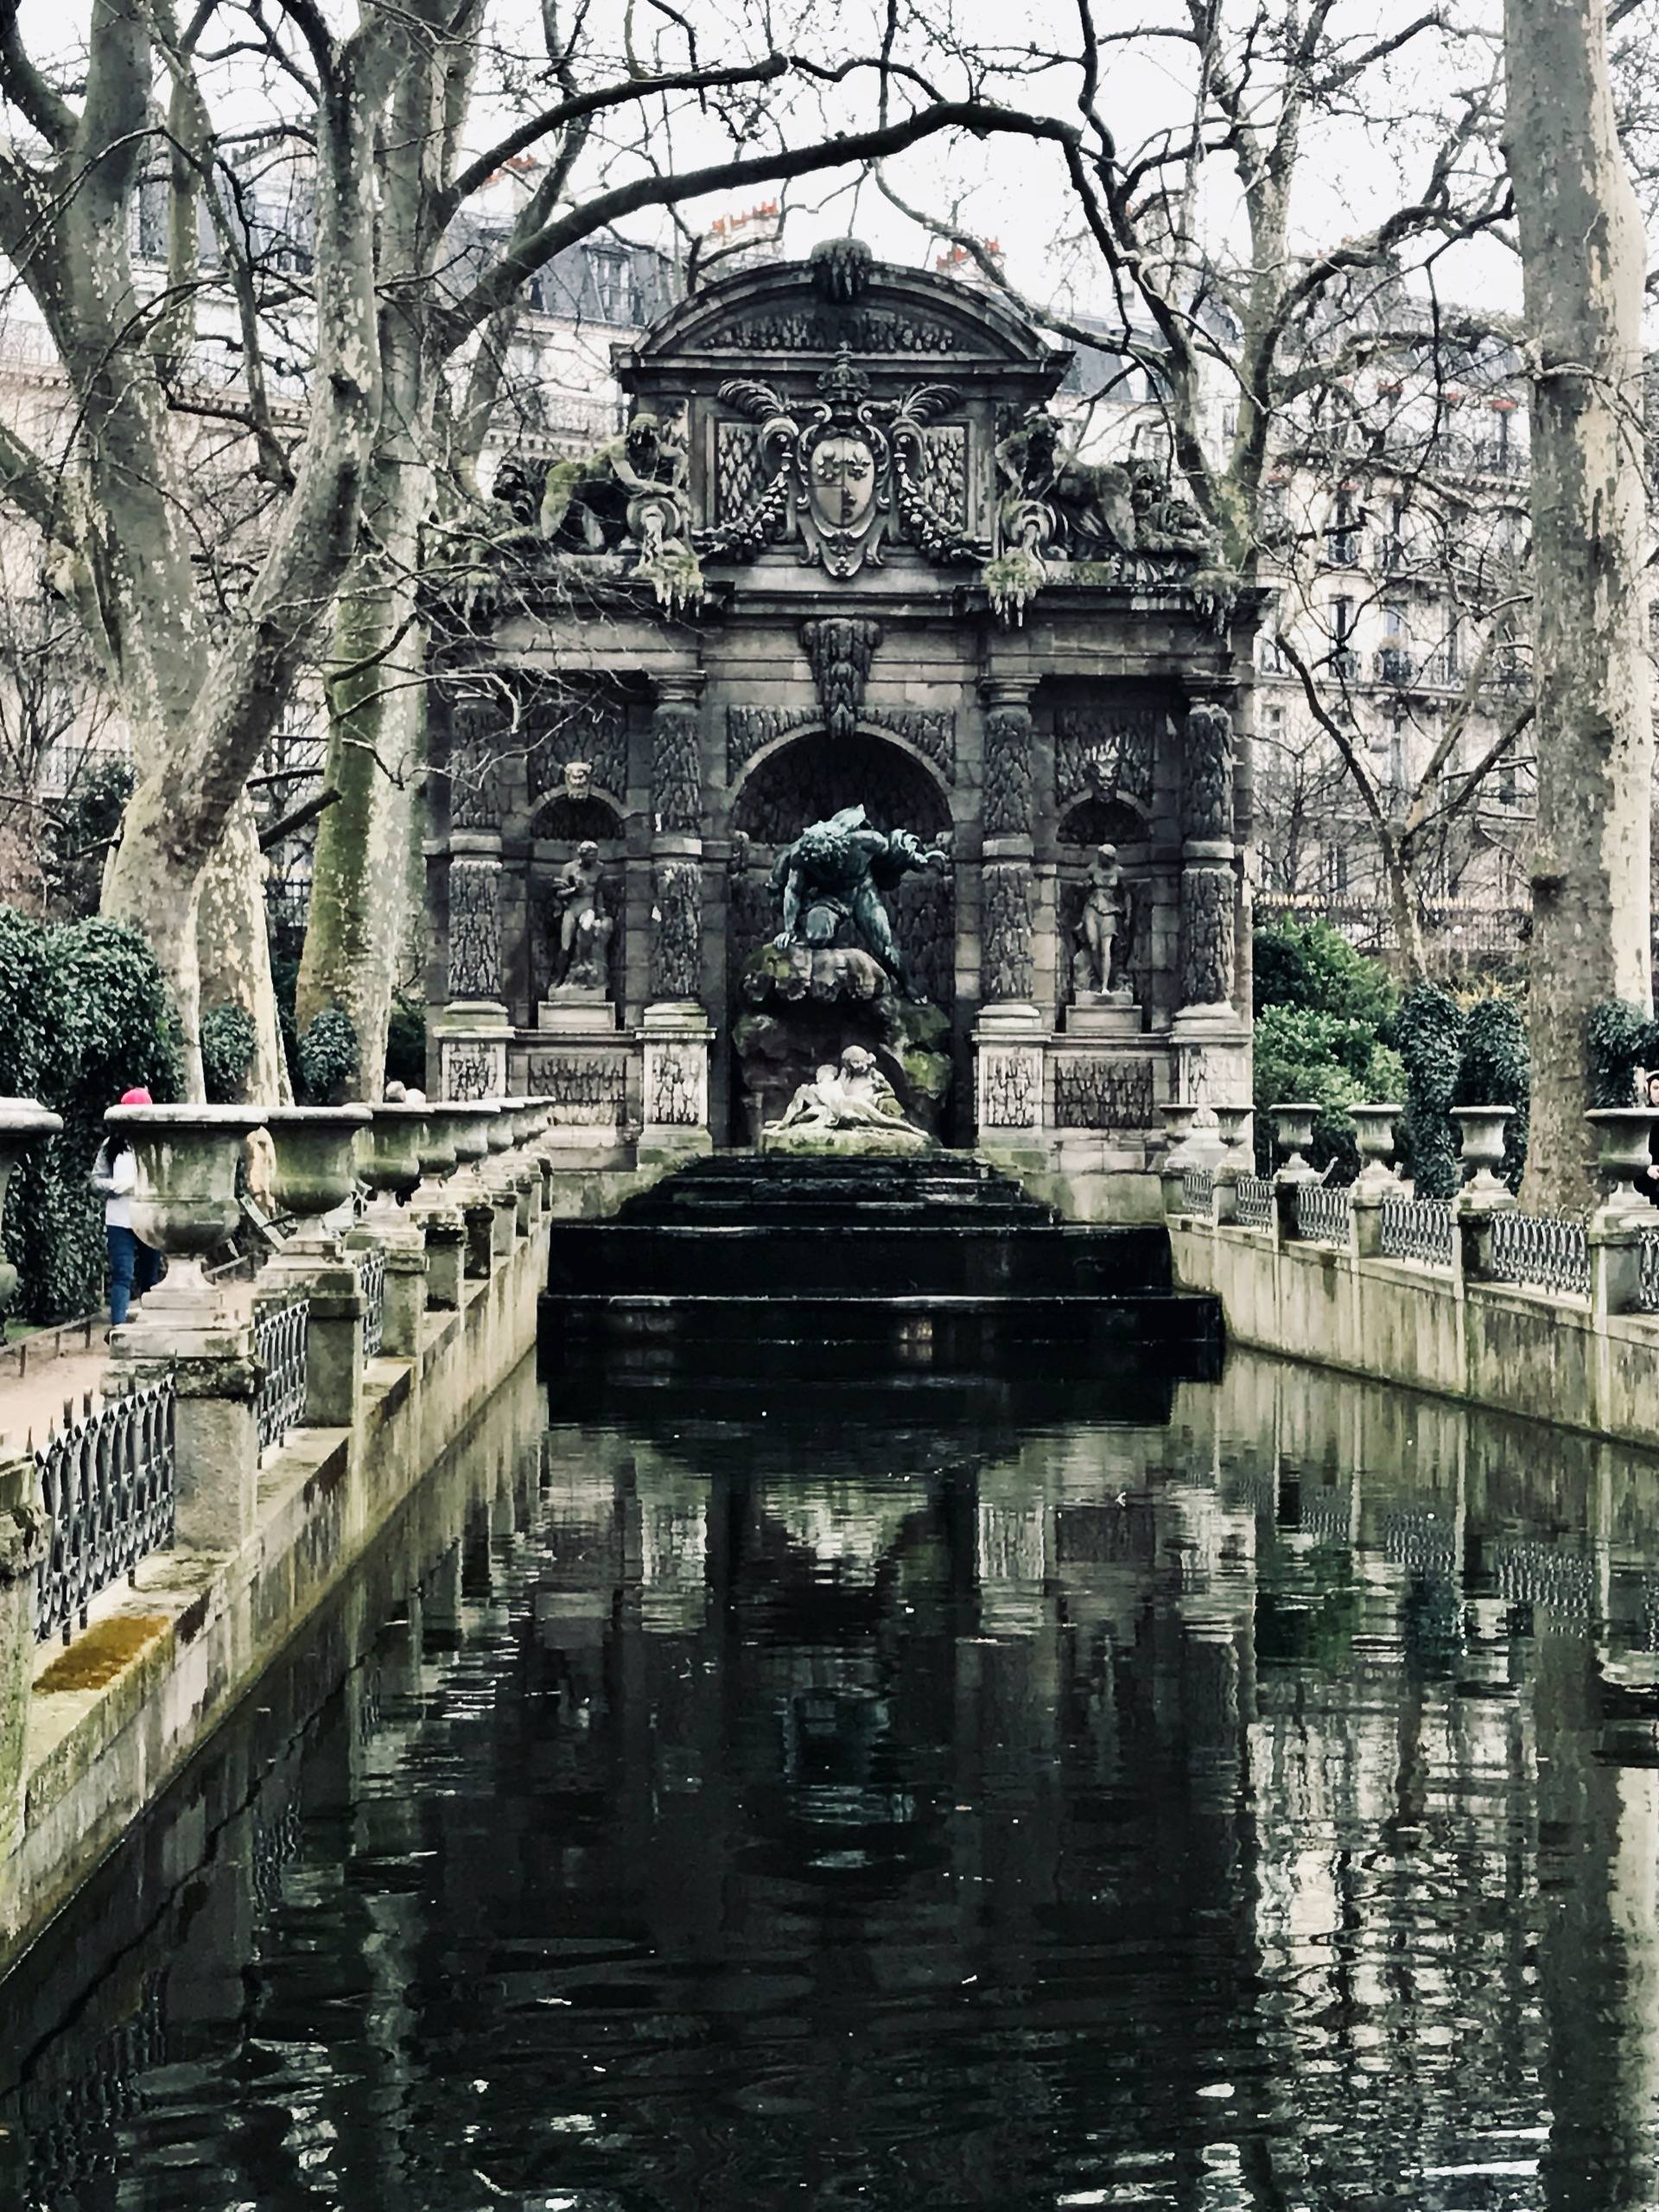 Travels in France: La Fontaine Médicis (Luxembourg Gardens)